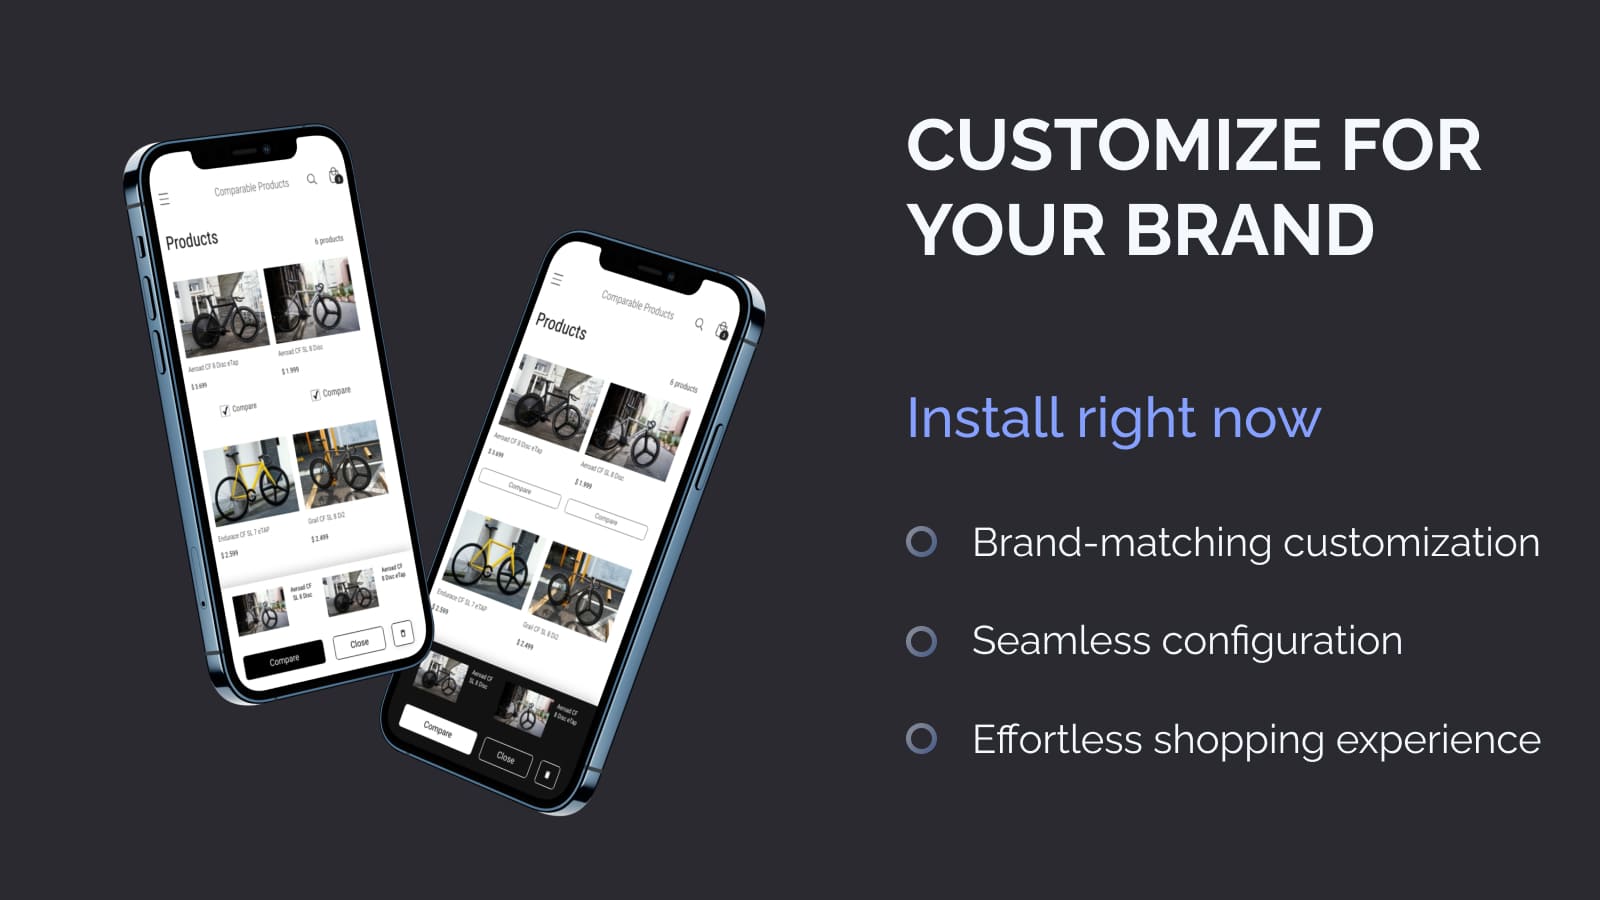 comparable-compare-products-app-customization-for-brand